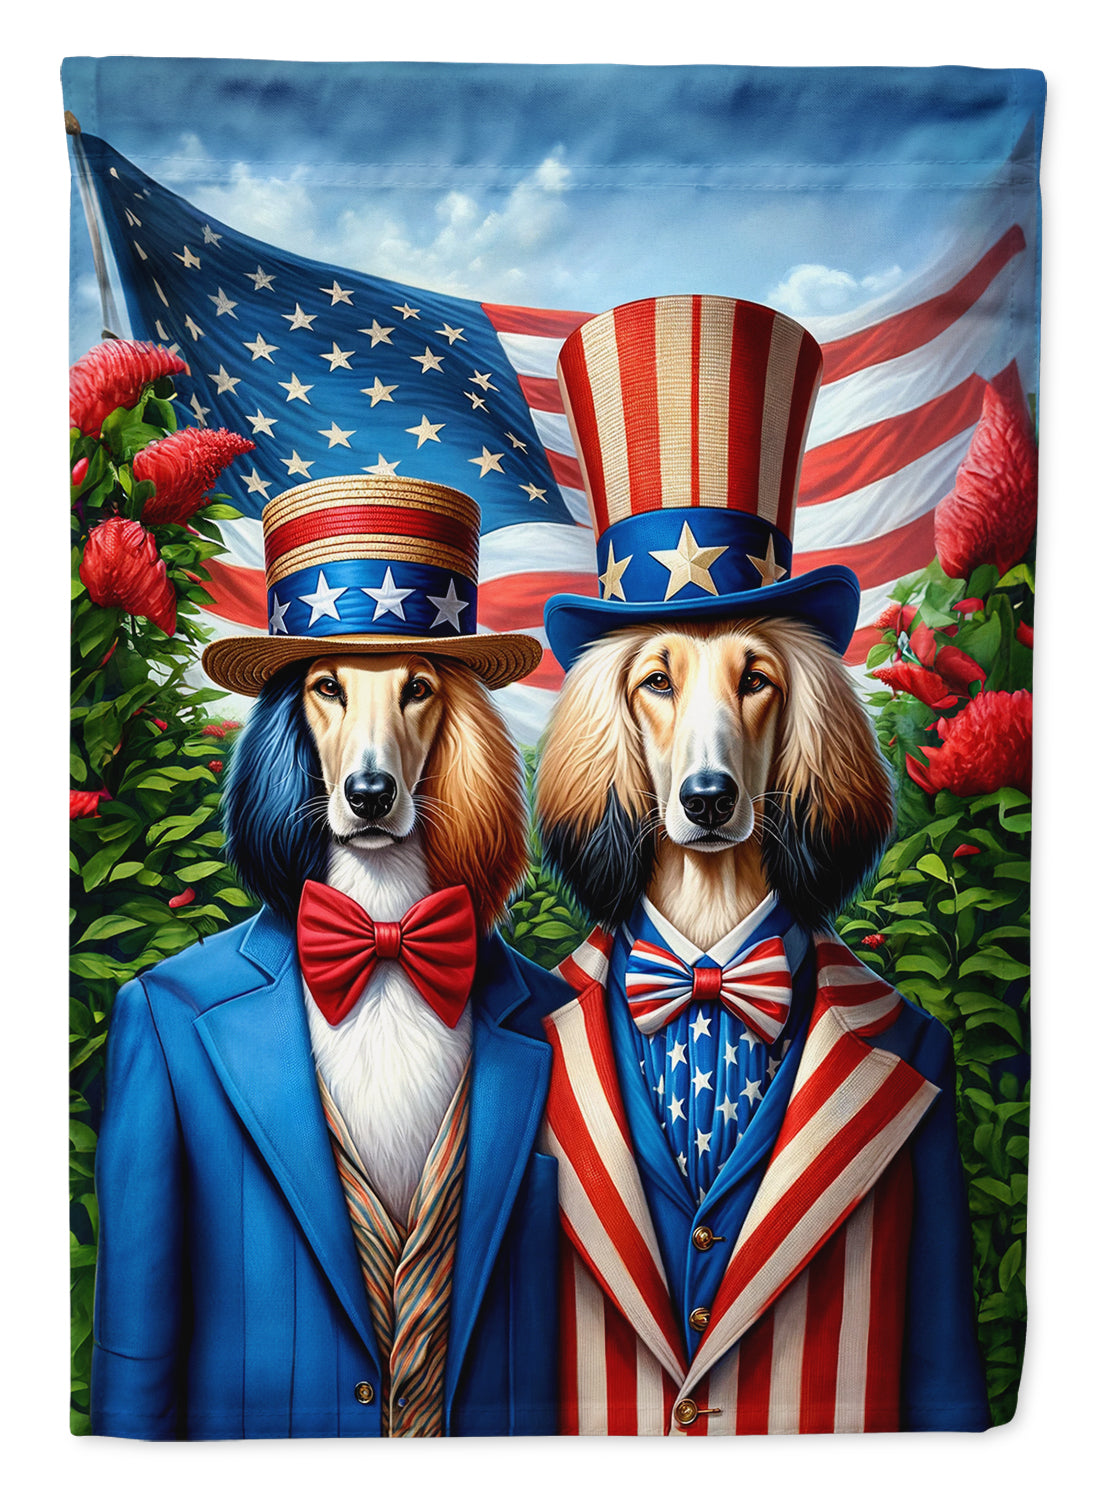 Buy this All American Afghan Hound Garden Flag